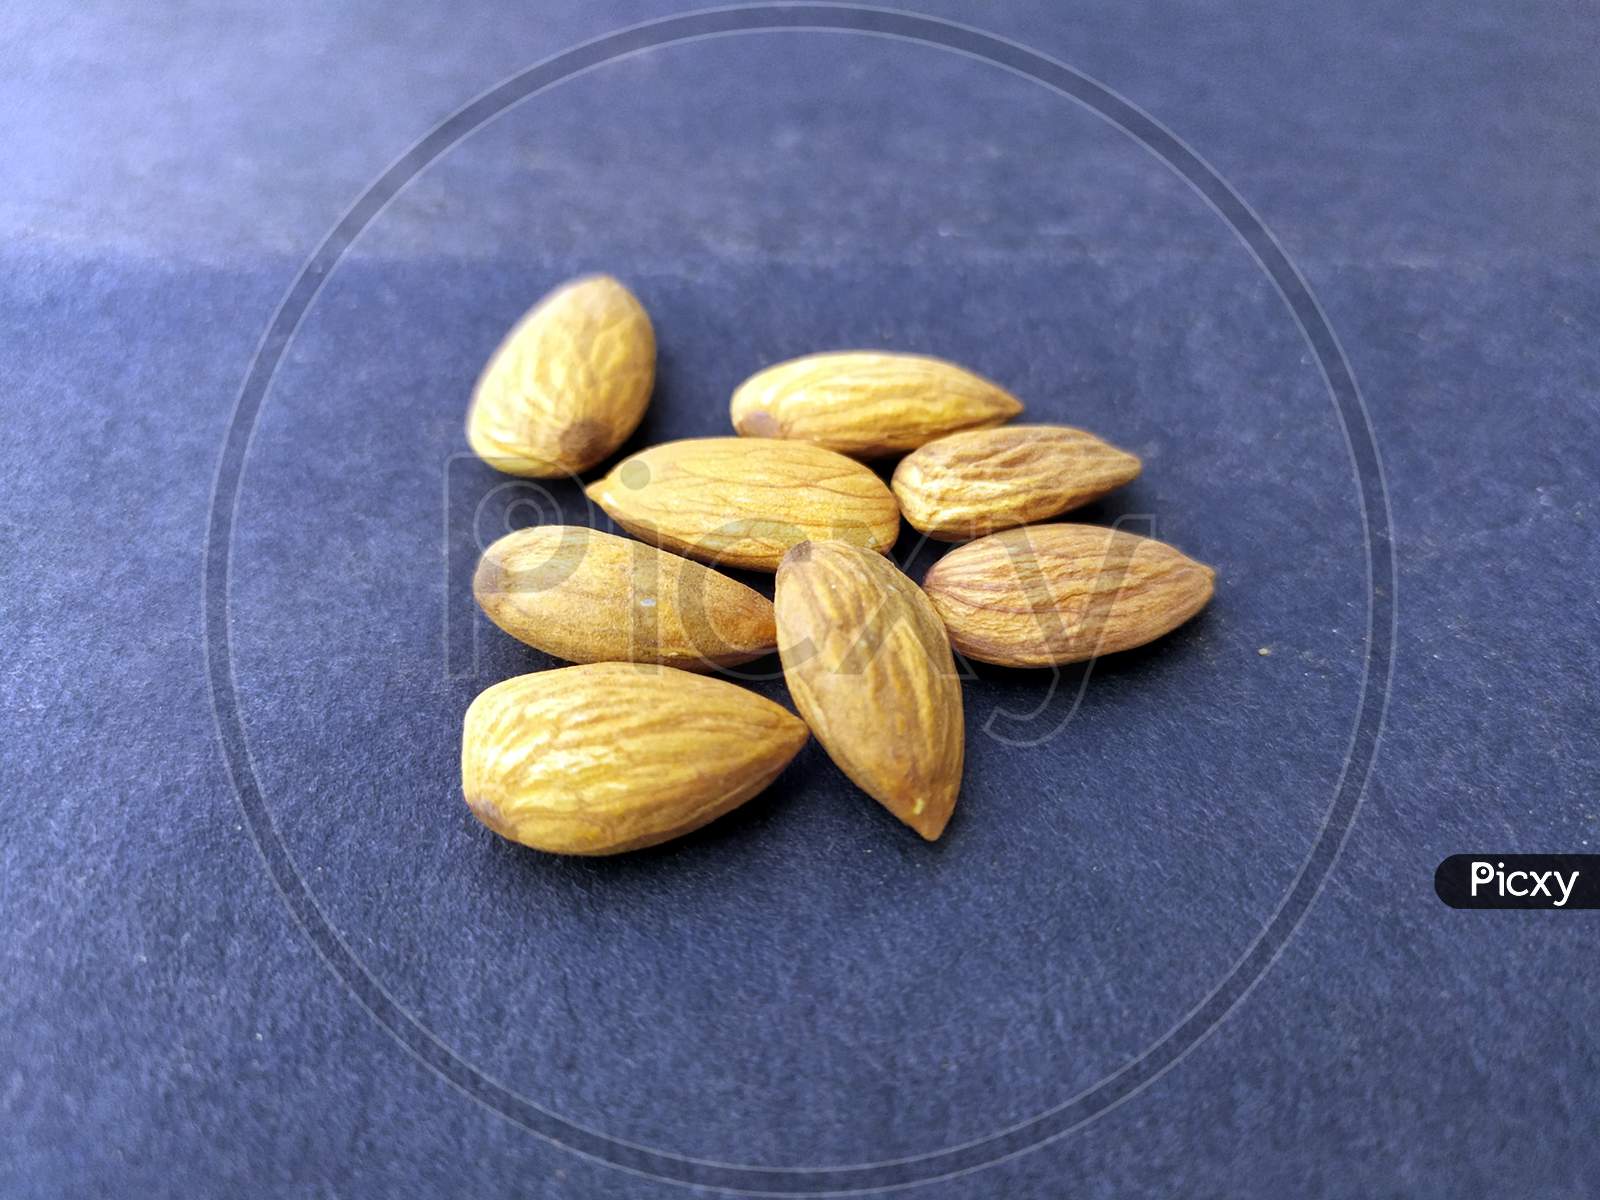 some fresh healthy almonds put on black background